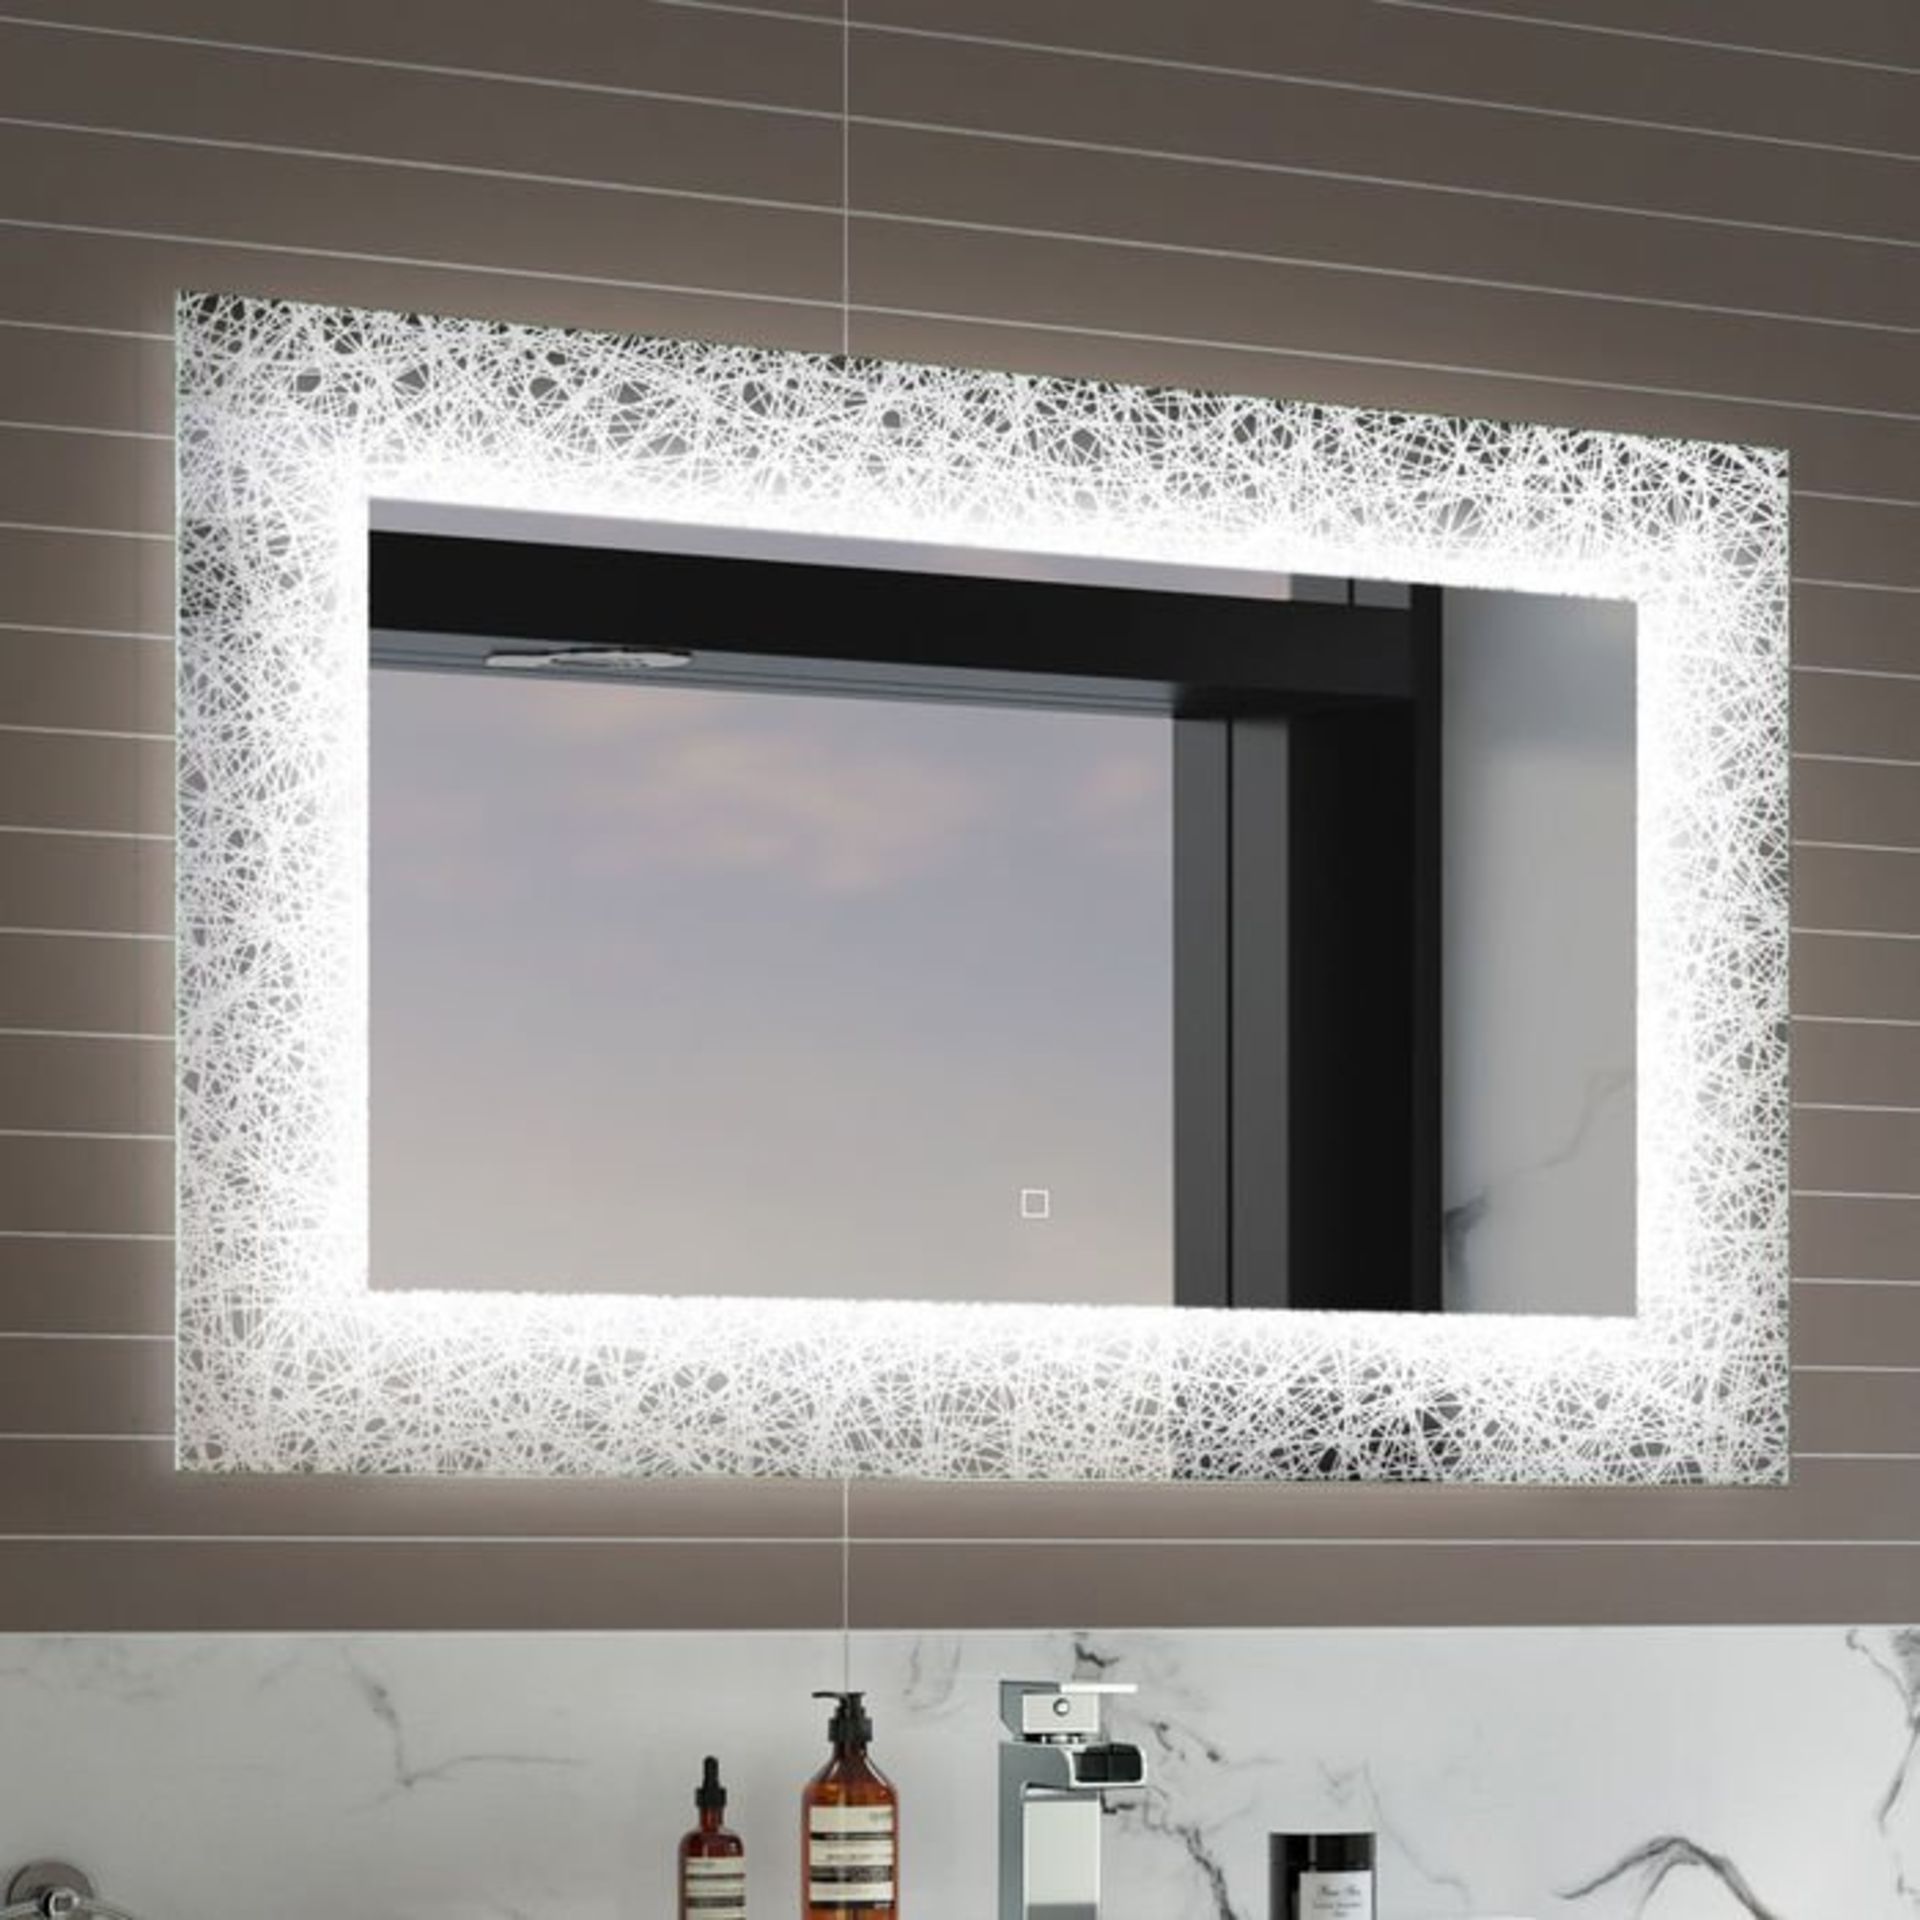 (Y206) 600x900mm Celestial Designer Illuminated LED Mirror - Switch Control. RRP £349.99. We love - Image 2 of 4